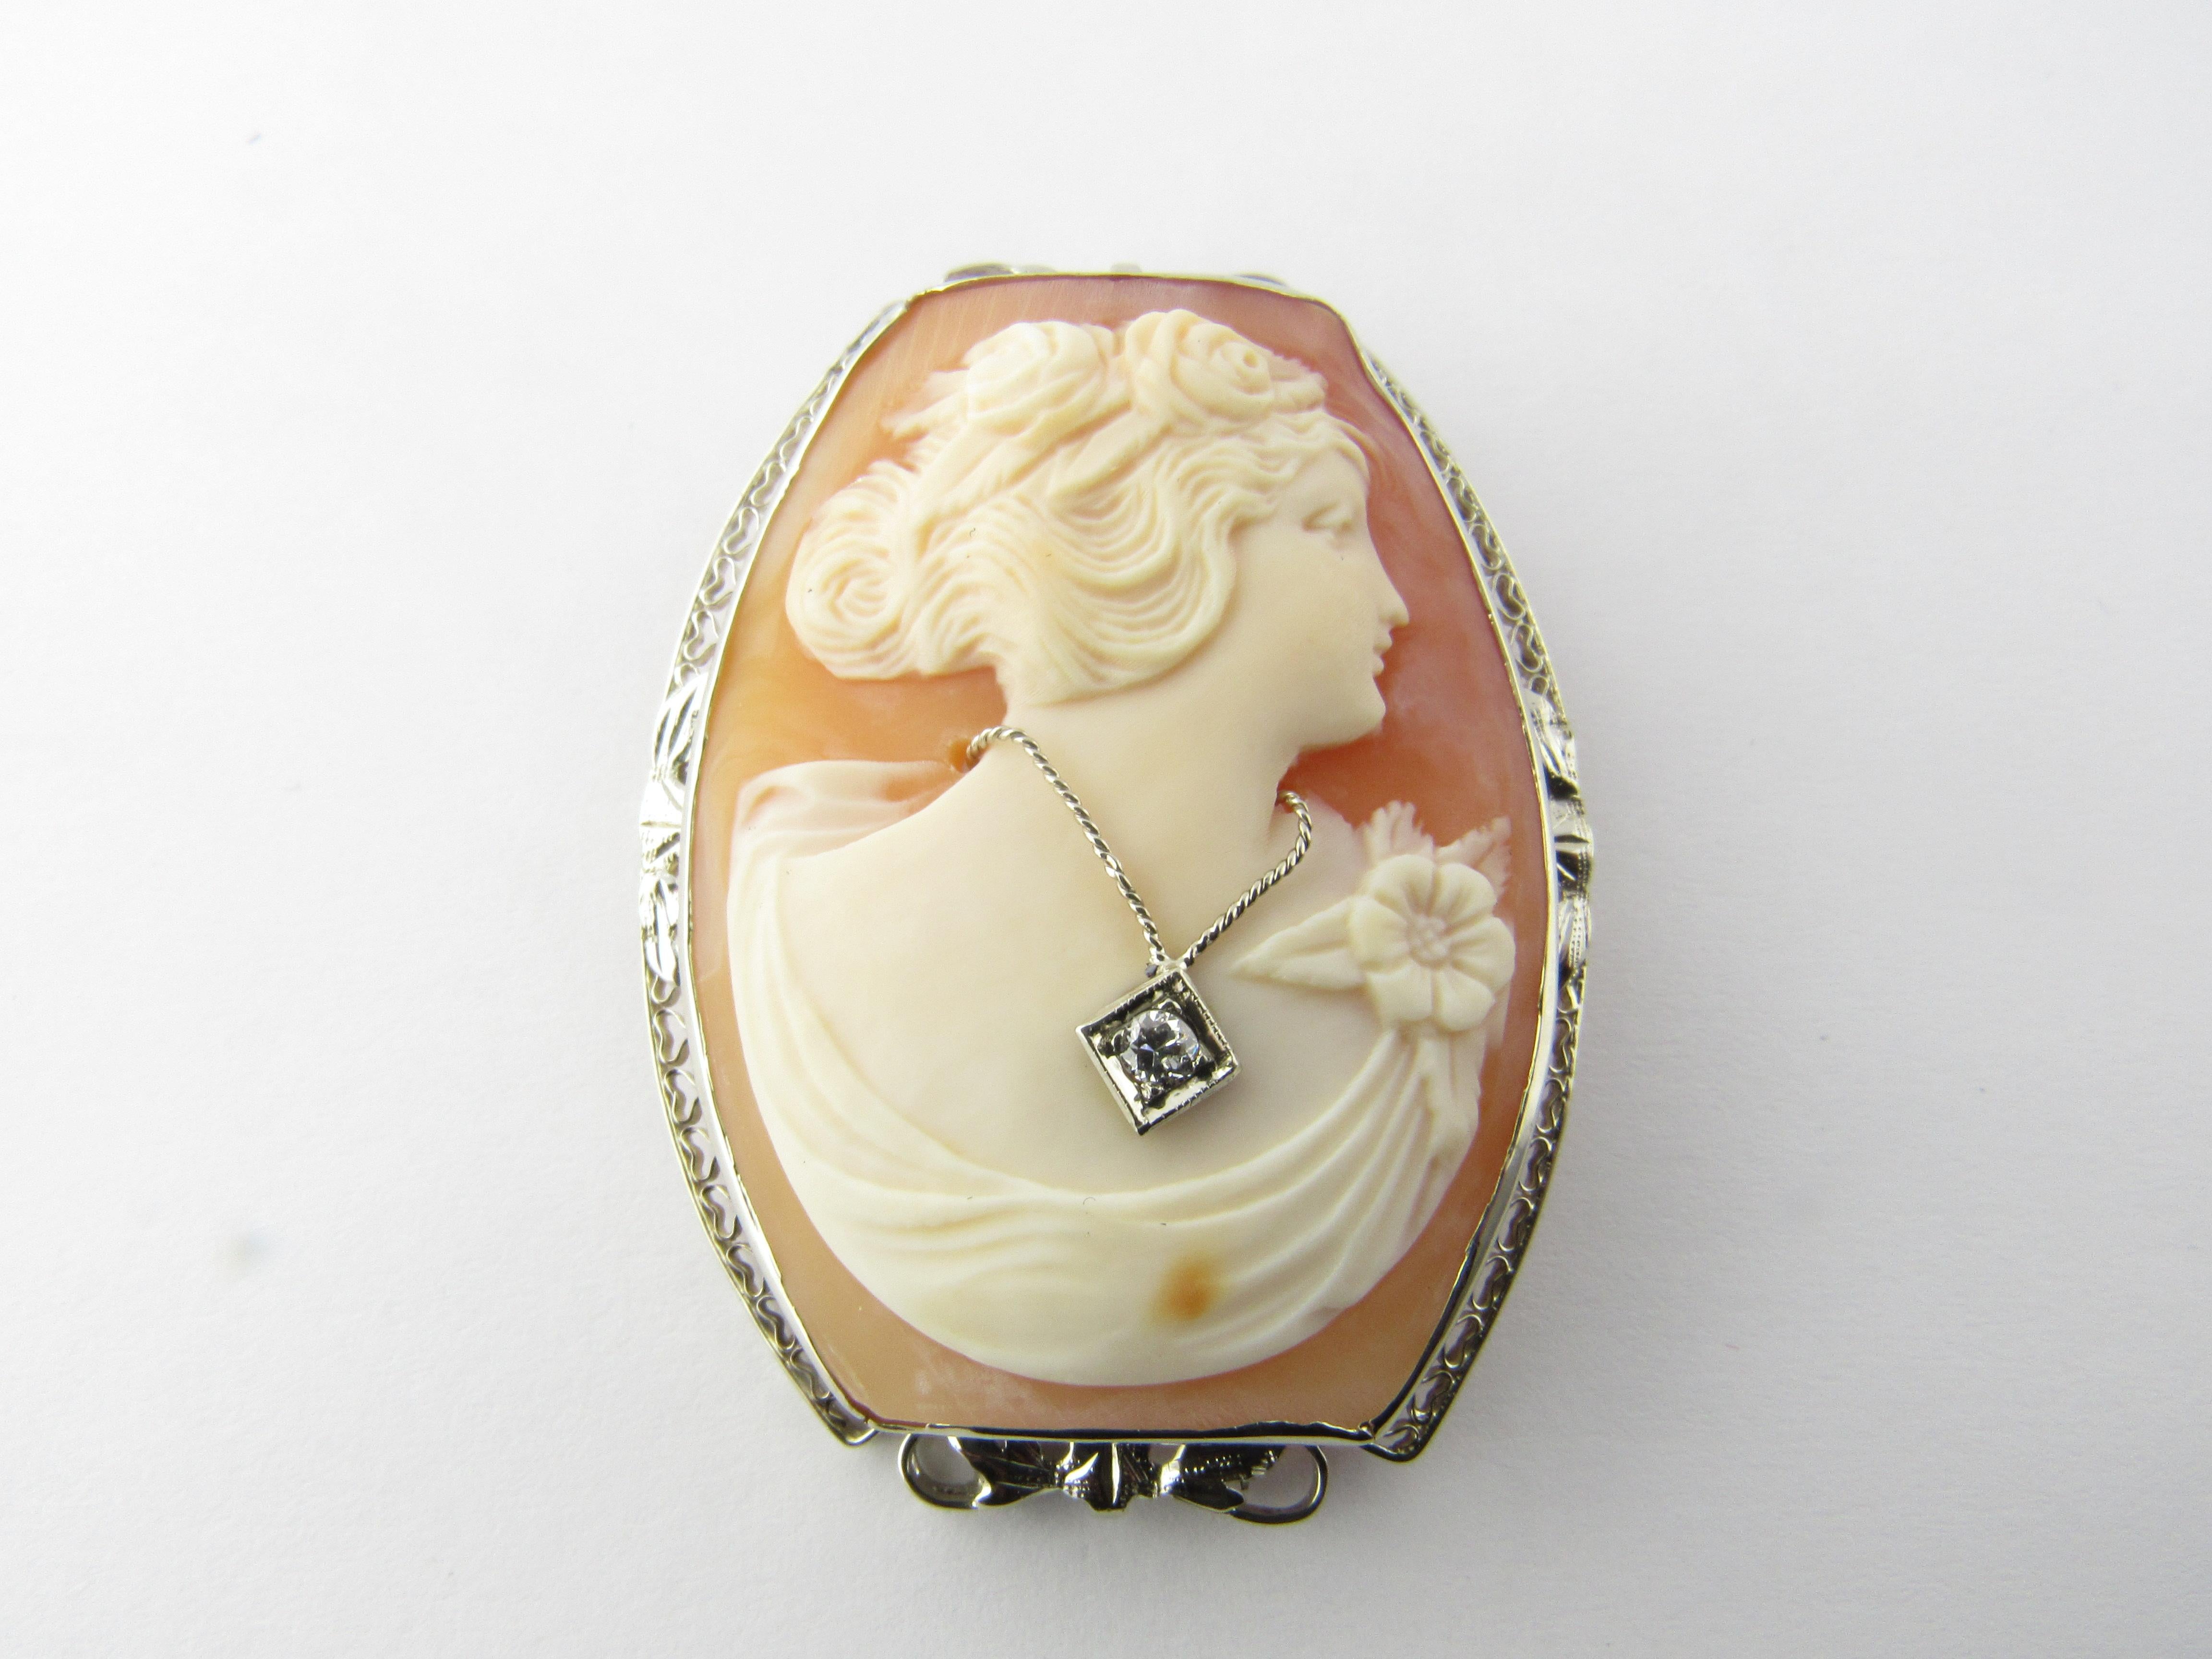 14 Karat White Gold and Diamond Cameo Brooch/Pendant-

This stunning cameo features a lovely lady in profile decorated with one round brilliant cut diamond.  Framed in meticulously detailed white gold filigree.  Can be worn as a brooch or a